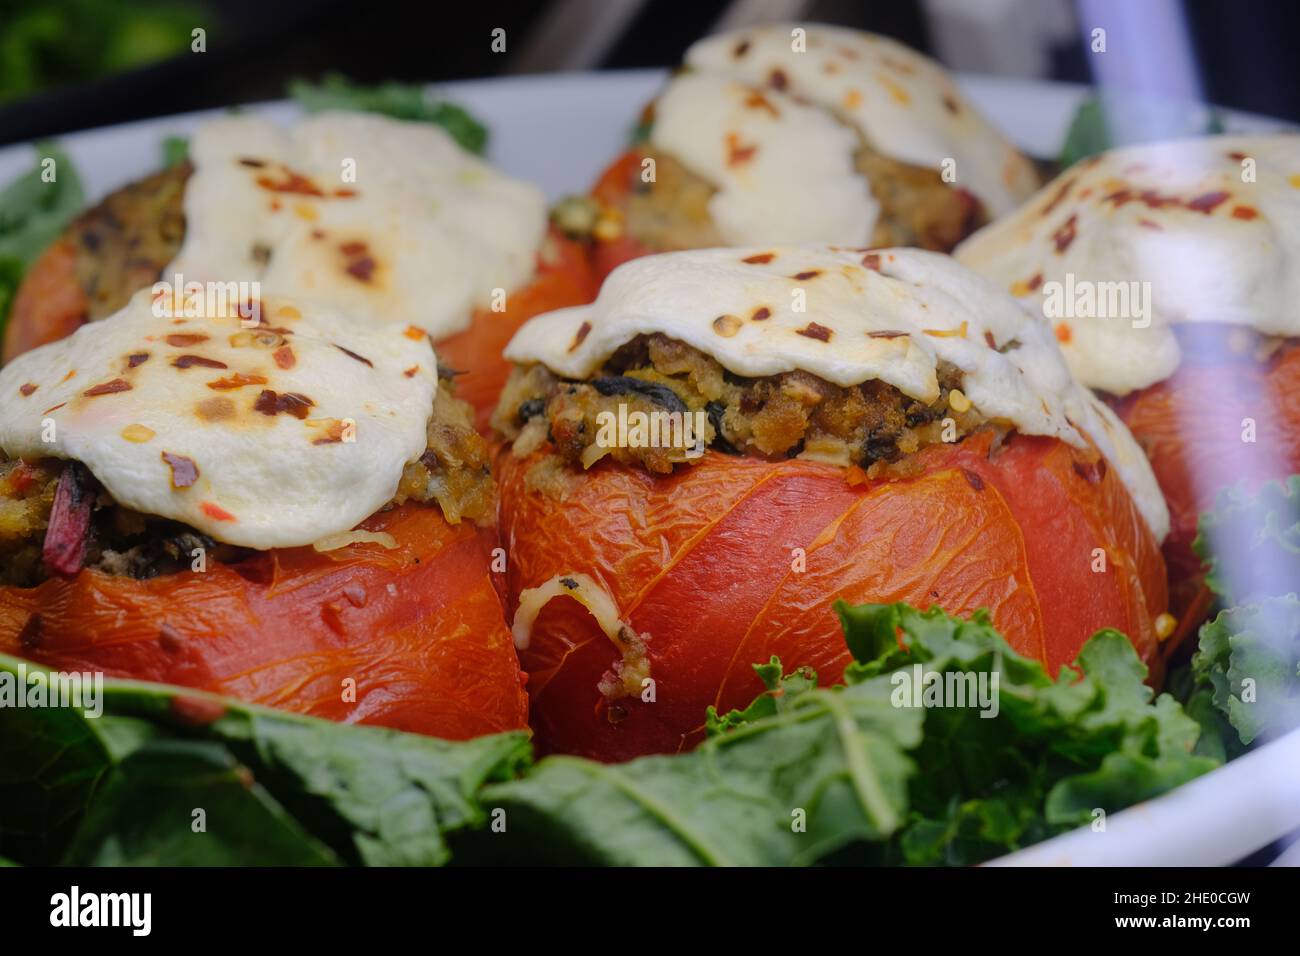 Stuffed tomatoes with mozzarella cheese on display at local deli Stock Photo